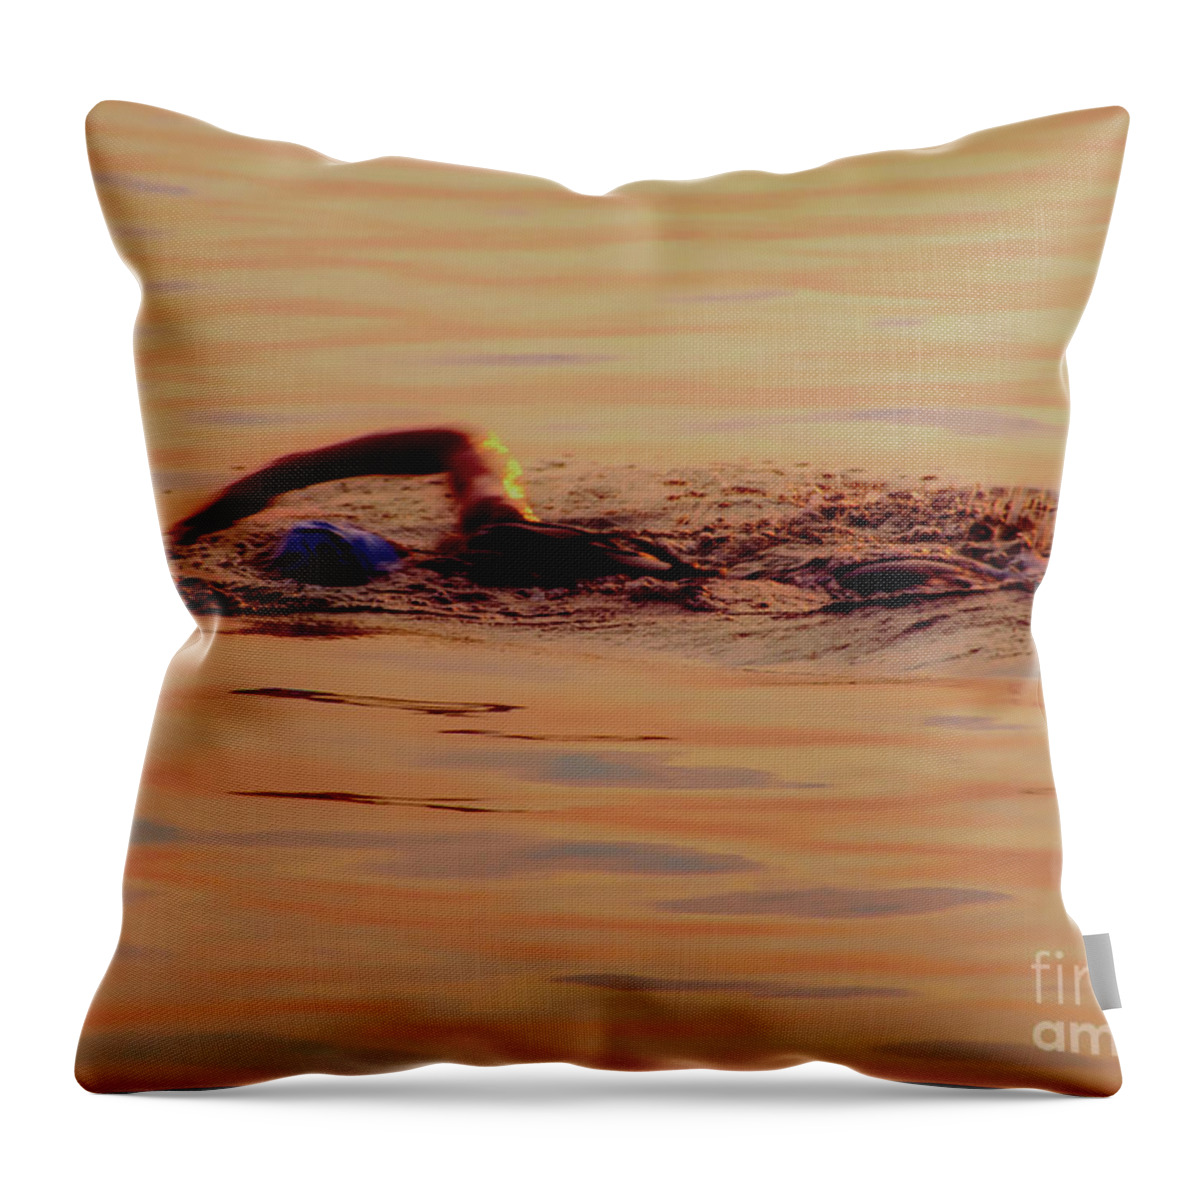 Chicago Throw Pillow featuring the photograph Swimmer 1 Chicago Triathlon swimmer at sunrise Lake Michigan by Tom Jelen